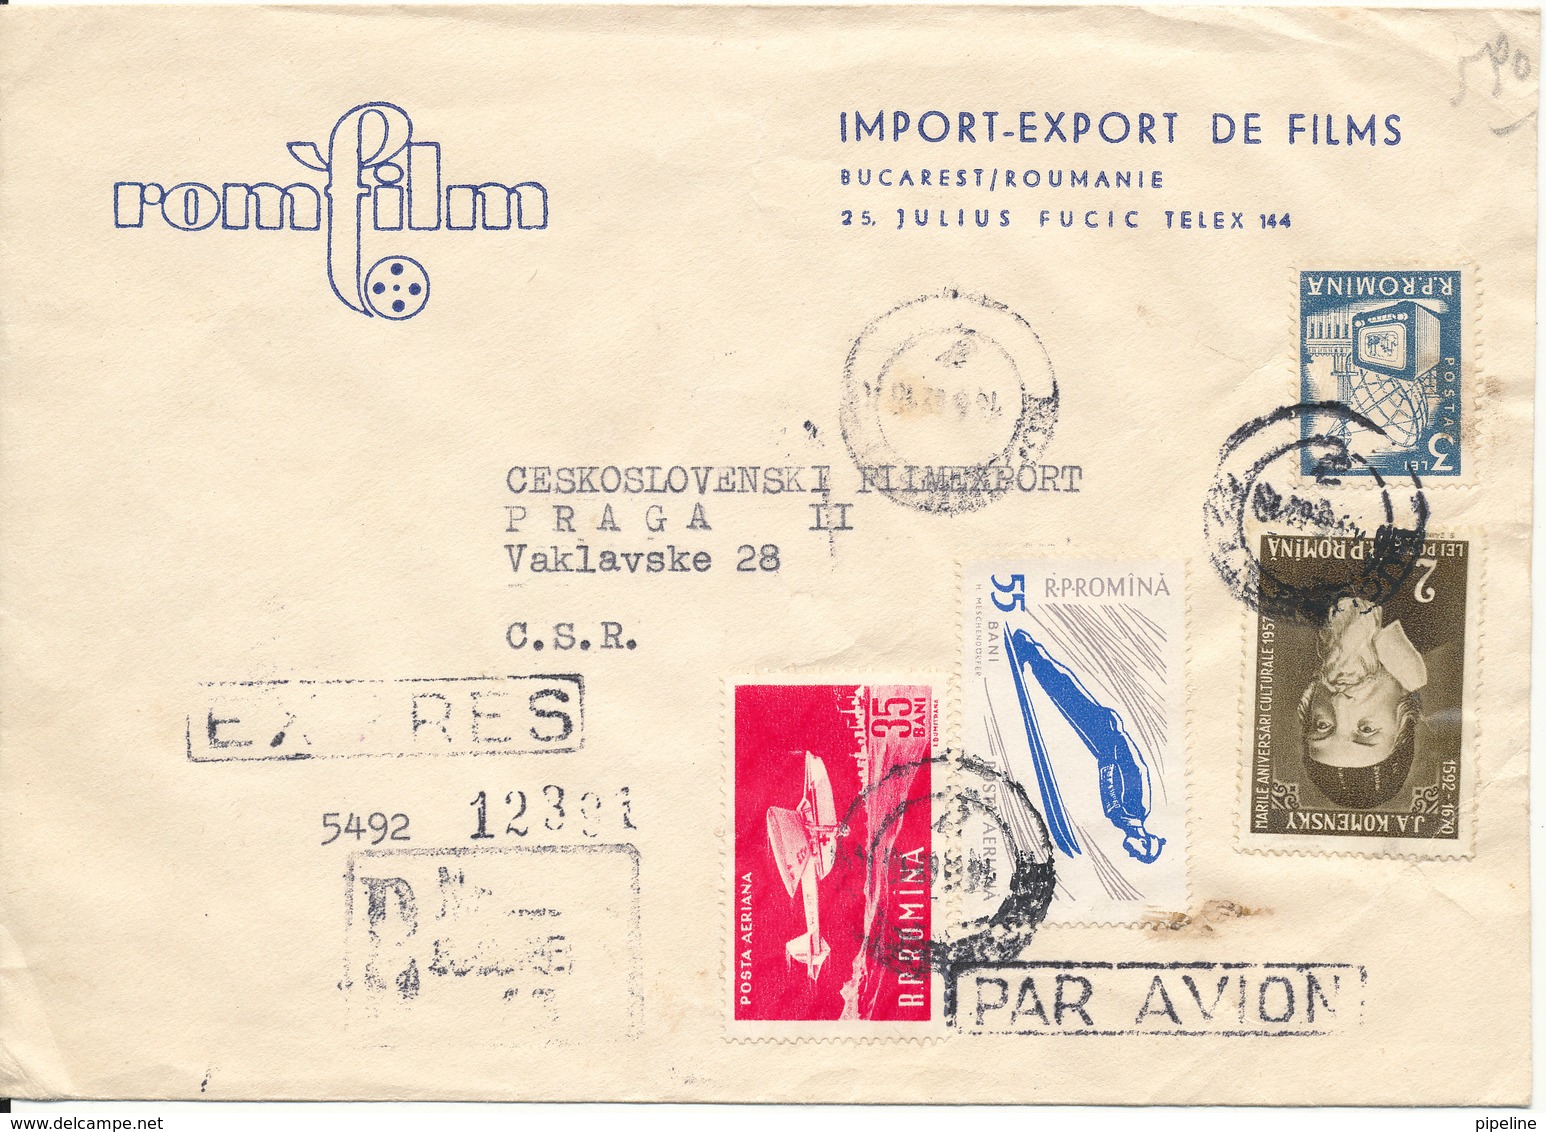 Romania Registered Express Cover Sent To Czechoslovakia 1962 - Covers & Documents